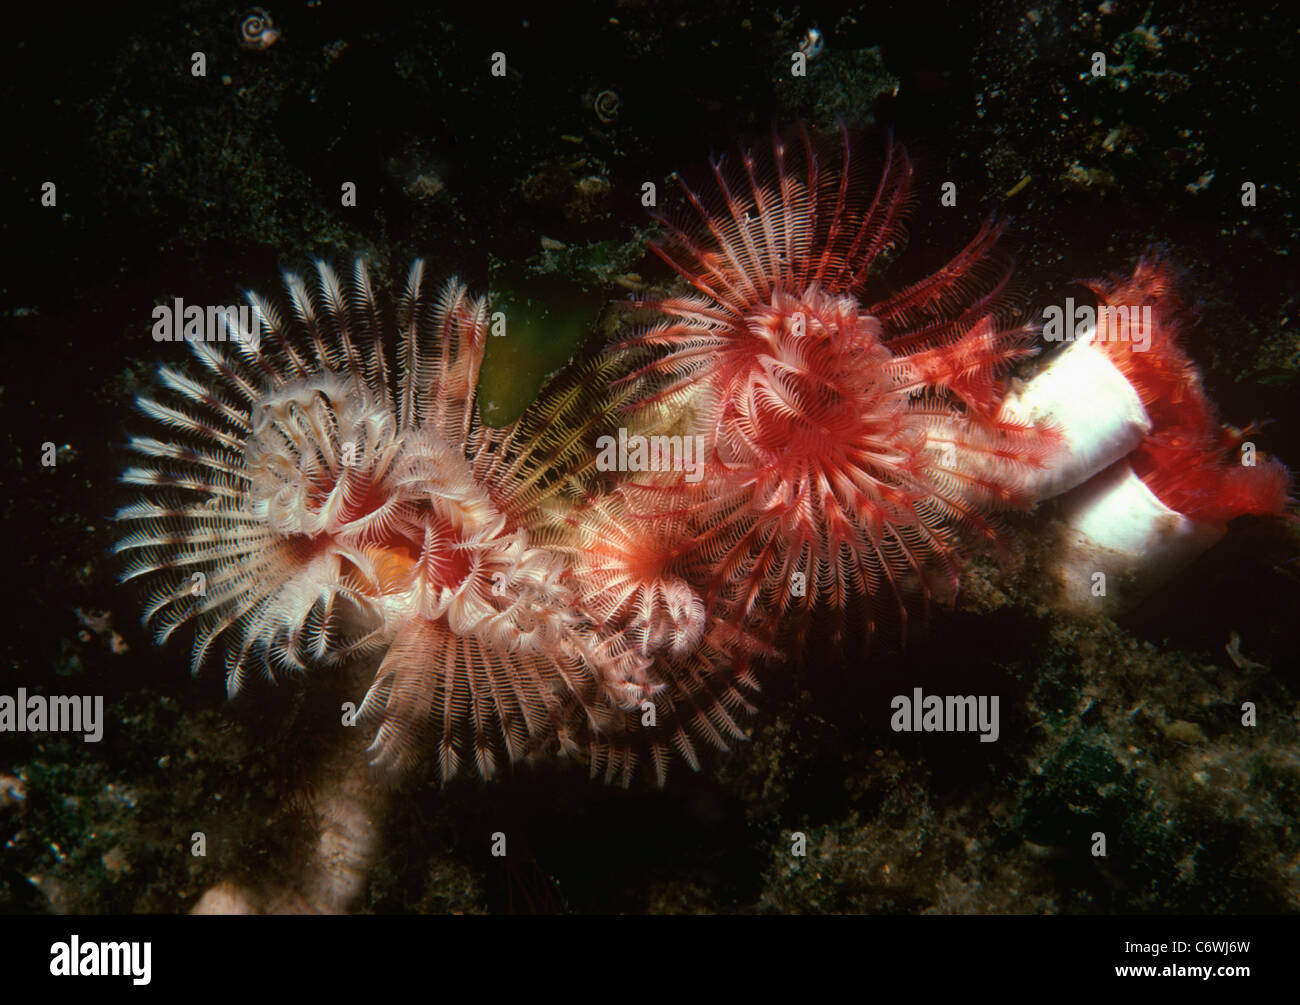 Giant Feather Duster Worms (Eudistylia polymorpha) open and feeding on plankton, and closed. Puget Sound, Washington, USA Stock Photo